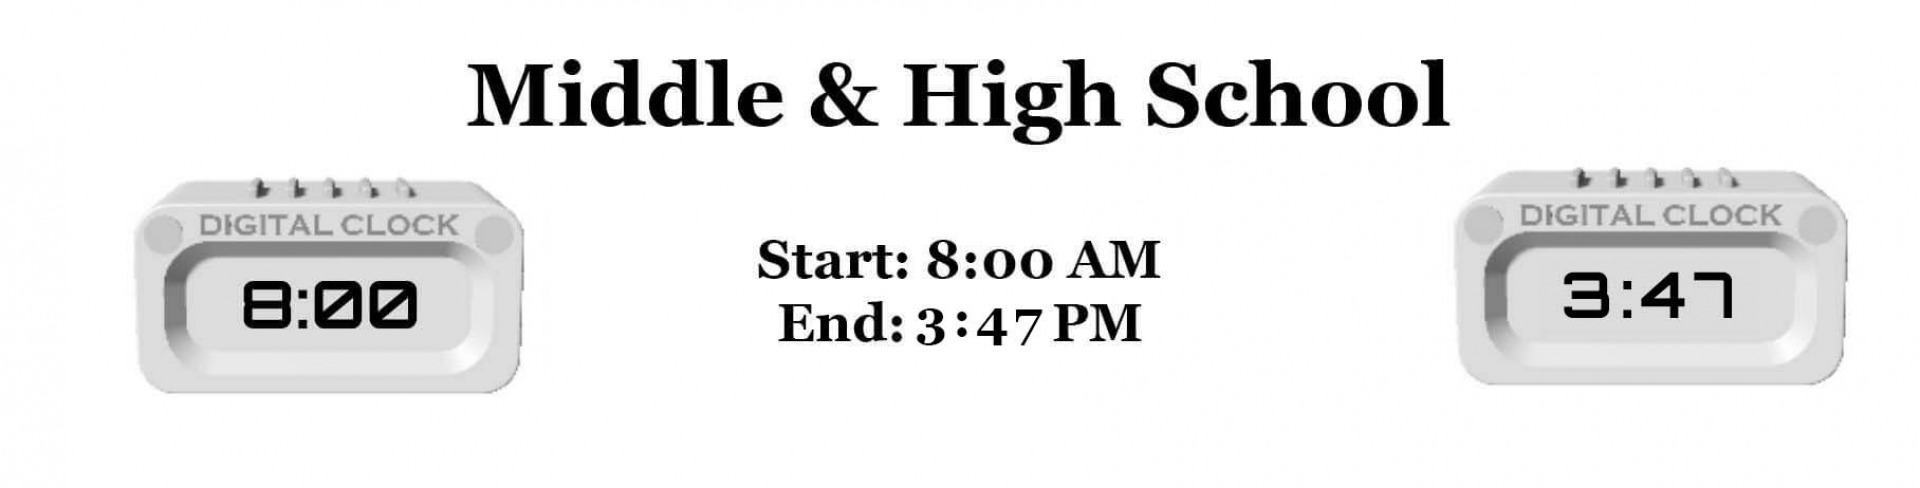 Proposed Middle School & High School Start and End Time: 8:00 am to 3:47 pm